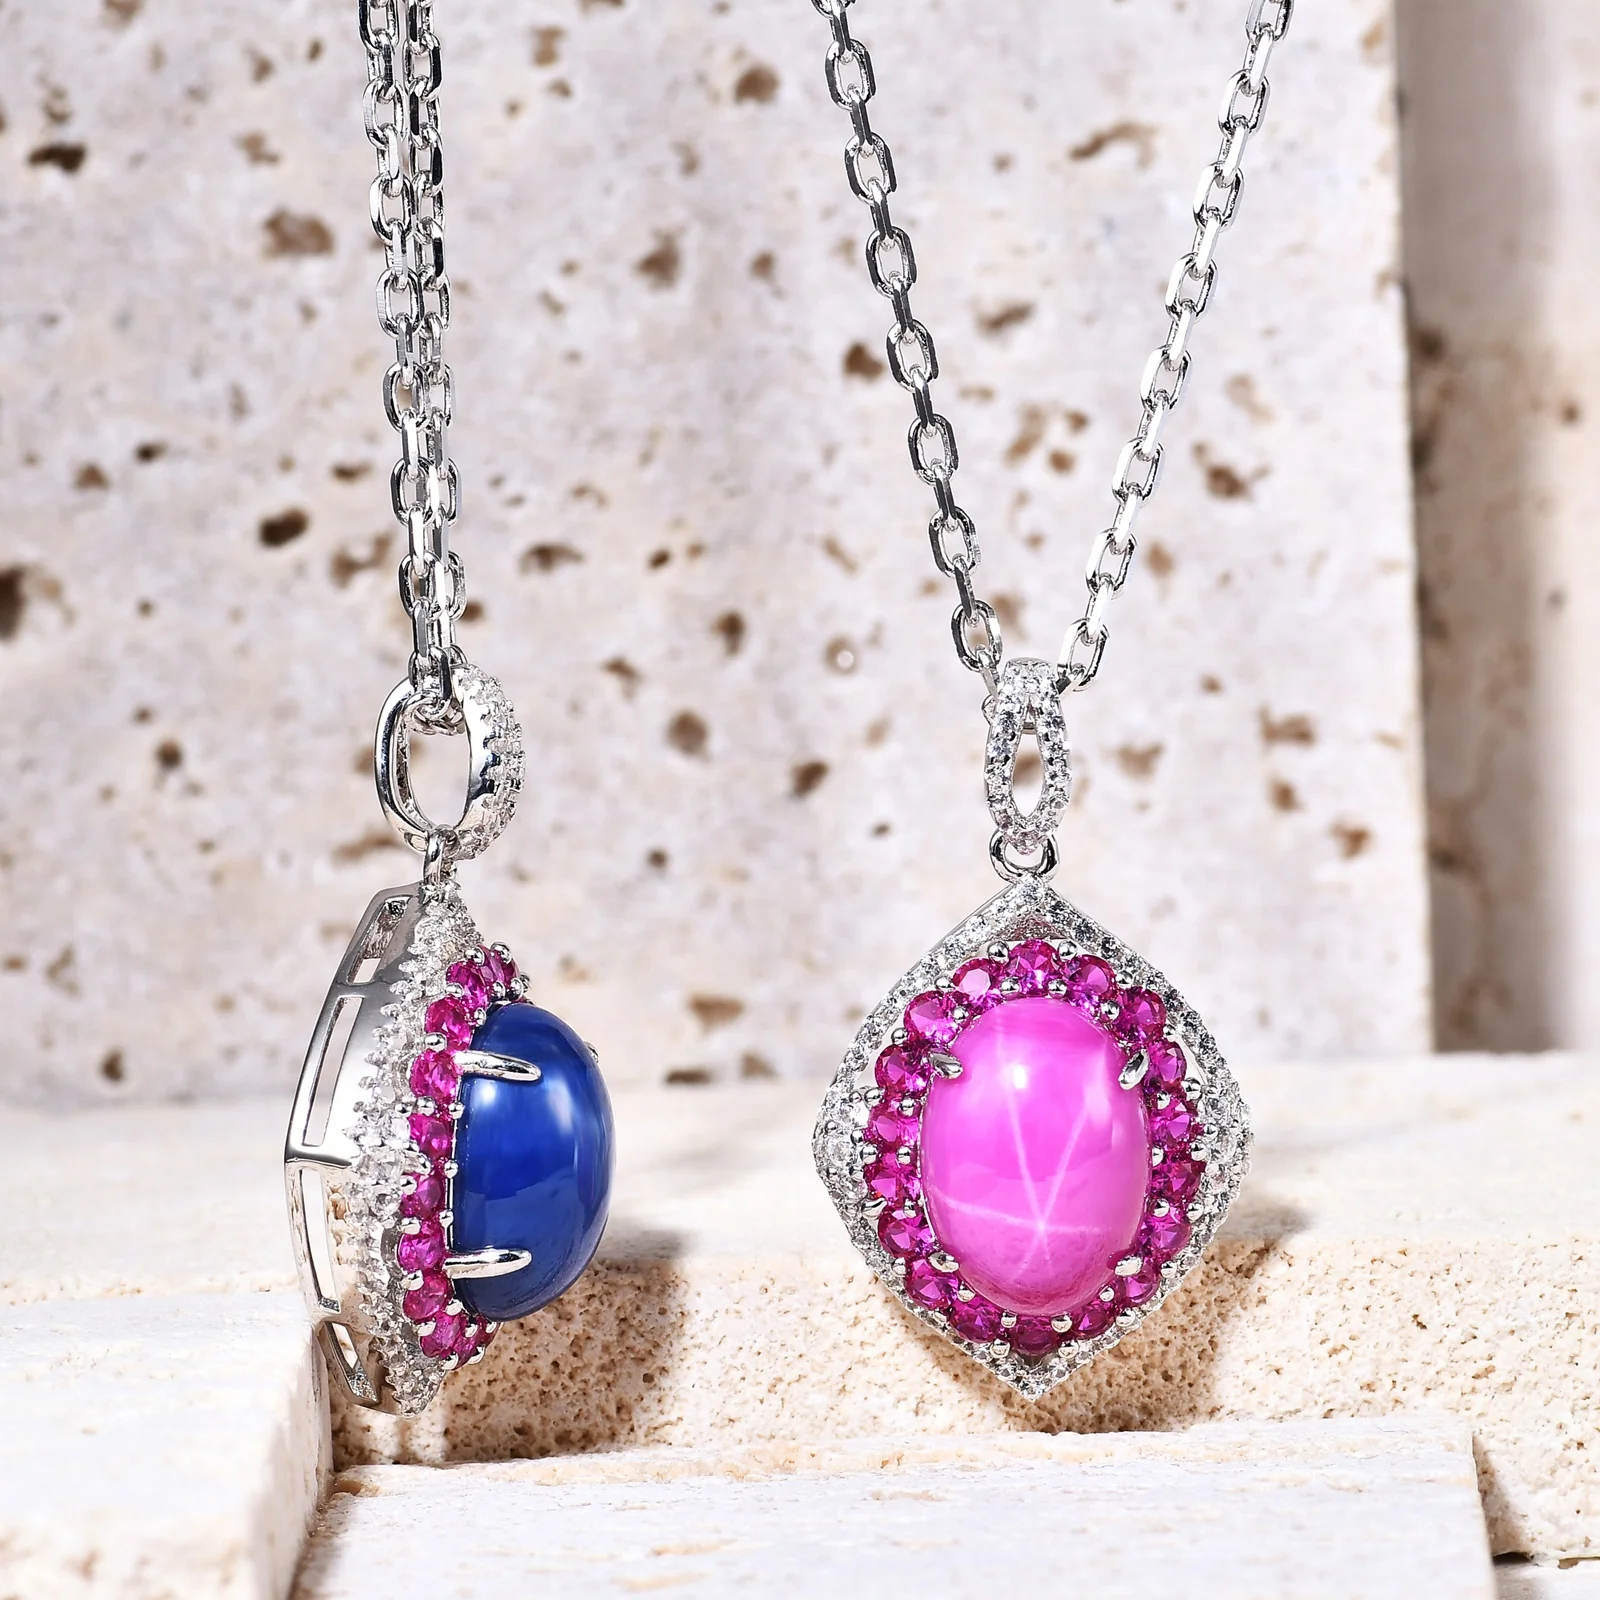 

C4028P Abiding Jewelry Good Selling 925 Sterling Silver Cats Eye Gems Cabochon Women Custom Made Necklace Silver Pendant